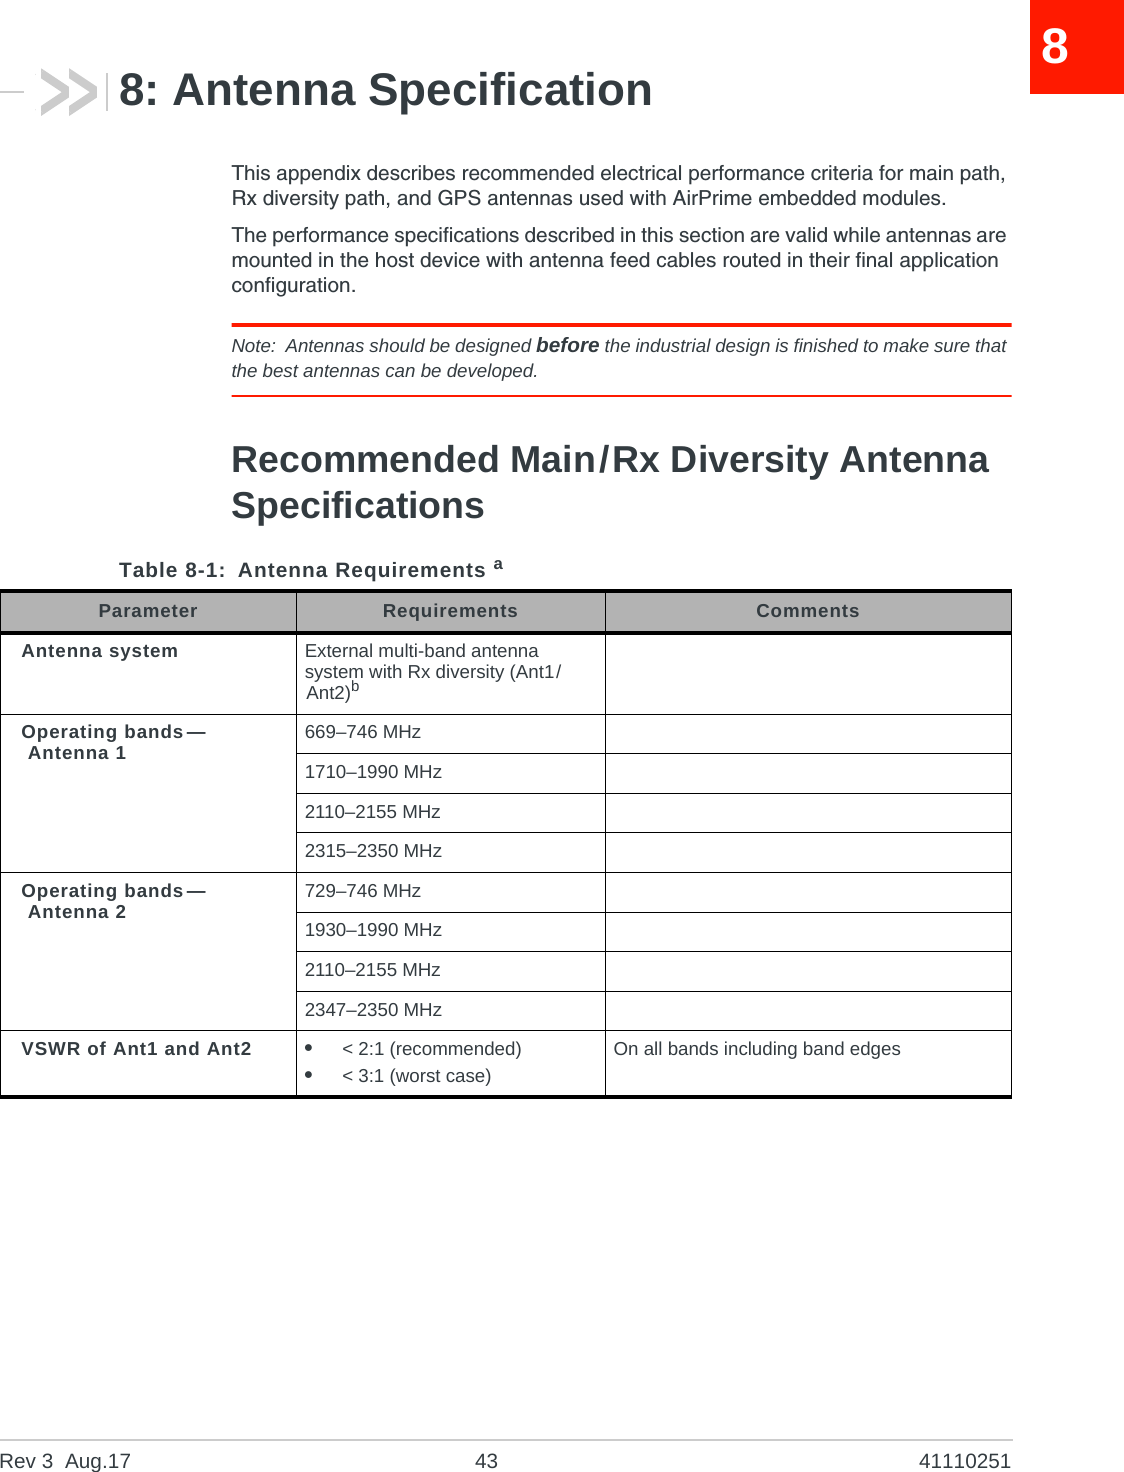 Rev 3  Aug.17 43 4111025188: Antenna SpecificationThis appendix describes recommended electrical performance criteria for main path, Rx diversity path, and GPS antennas used with AirPrime embedded modules.The performance specifications described in this section are valid while antennas are mounted in the host device with antenna feed cables routed in their final application configuration.Note: Antennas should be designed before the industrial design is finished to make sure that the best antennas can be developed.Recommended Main/Rx Diversity Antenna SpecificationsTable 8-1: Antenna Requirements a Parameter Requirements CommentsAntenna system External multi-band antenna system with Rx diversity (Ant1/Ant2)b Operating bands—Antenna 1 669–746 MHz1710–1990 MHz2110–2155 MHz2315–2350 MHzOperating bands—Antenna 2 729–746 MHz1930–1990 MHz2110–2155 MHz2347–2350 MHzVSWR of Ant1 and Ant2 •&lt; 2:1 (recommended)•&lt; 3:1 (worst case)On all bands including band edges